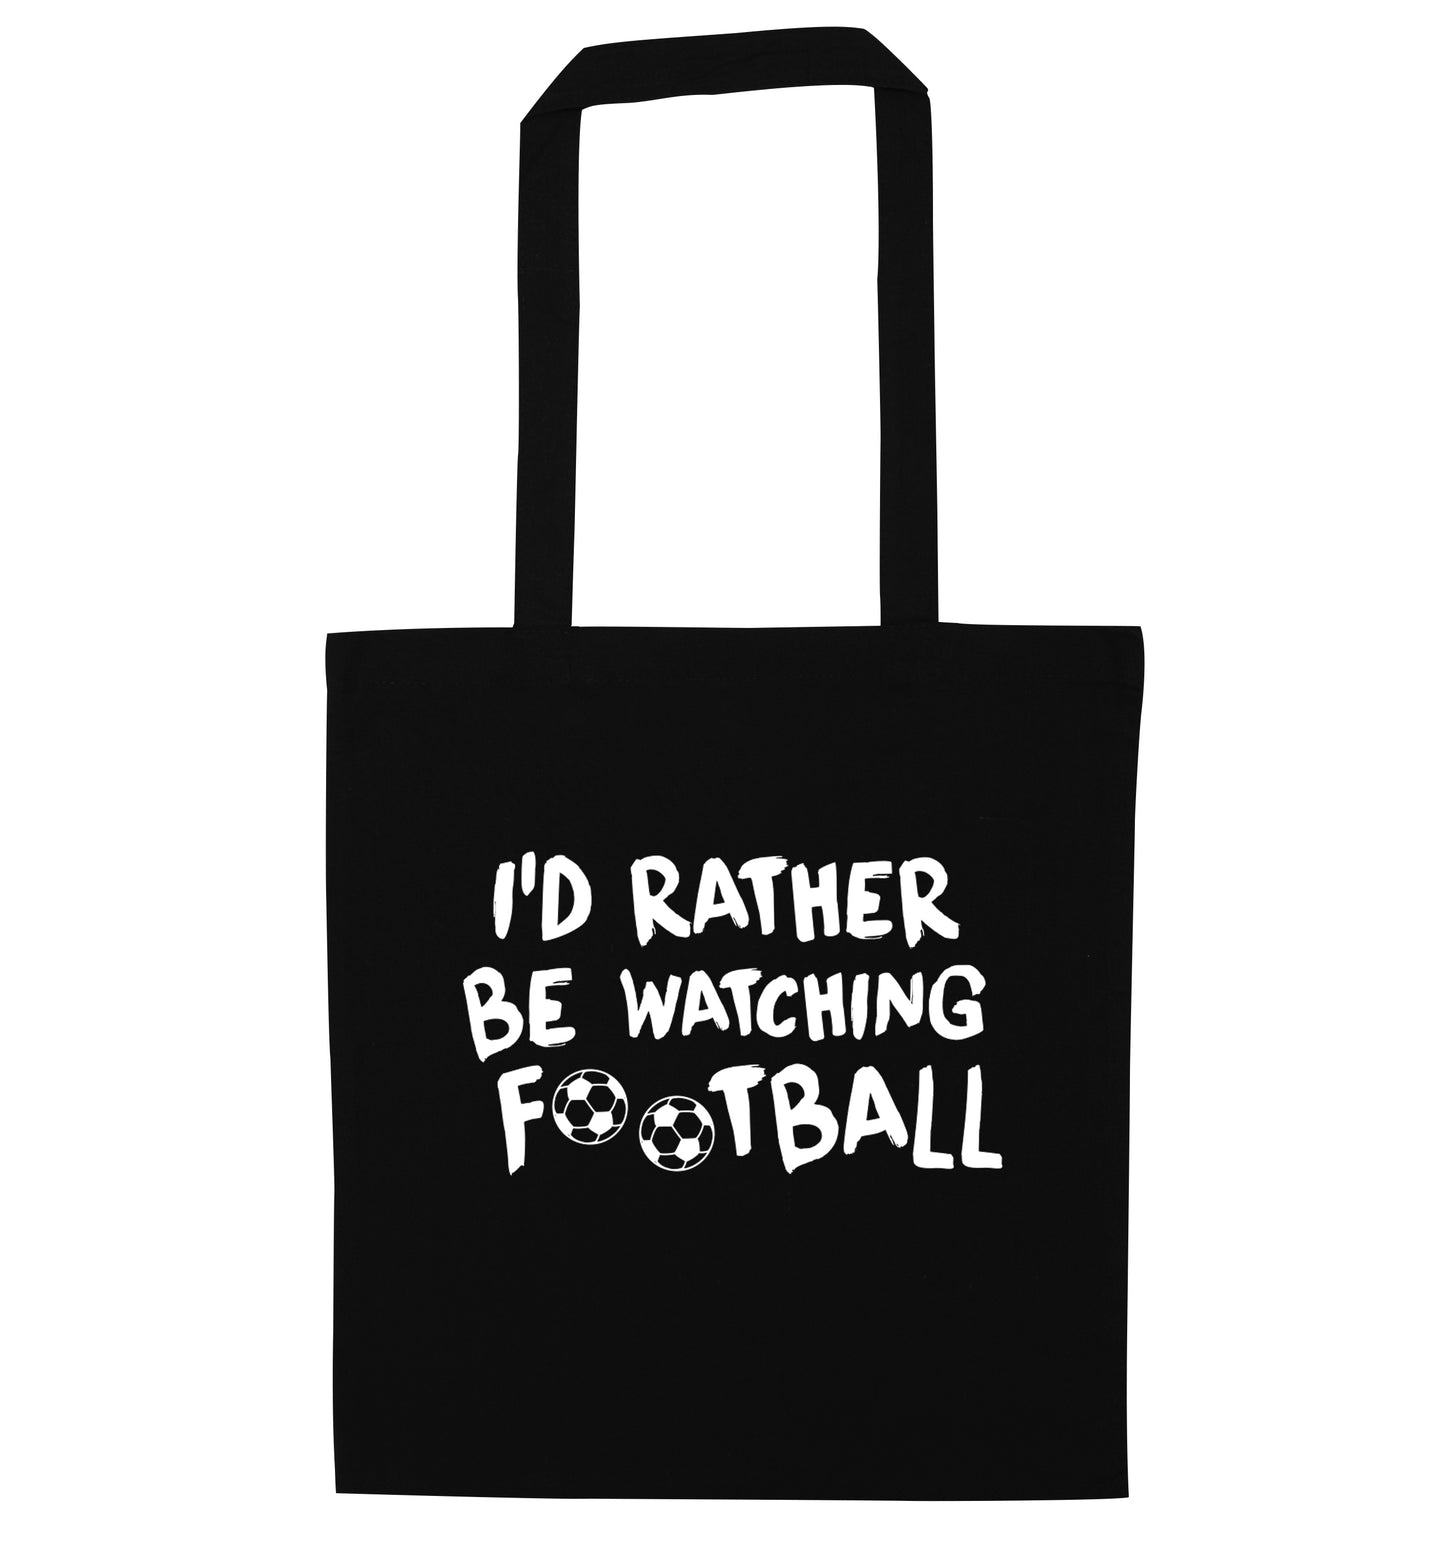 I'd rather be watching football black tote bag